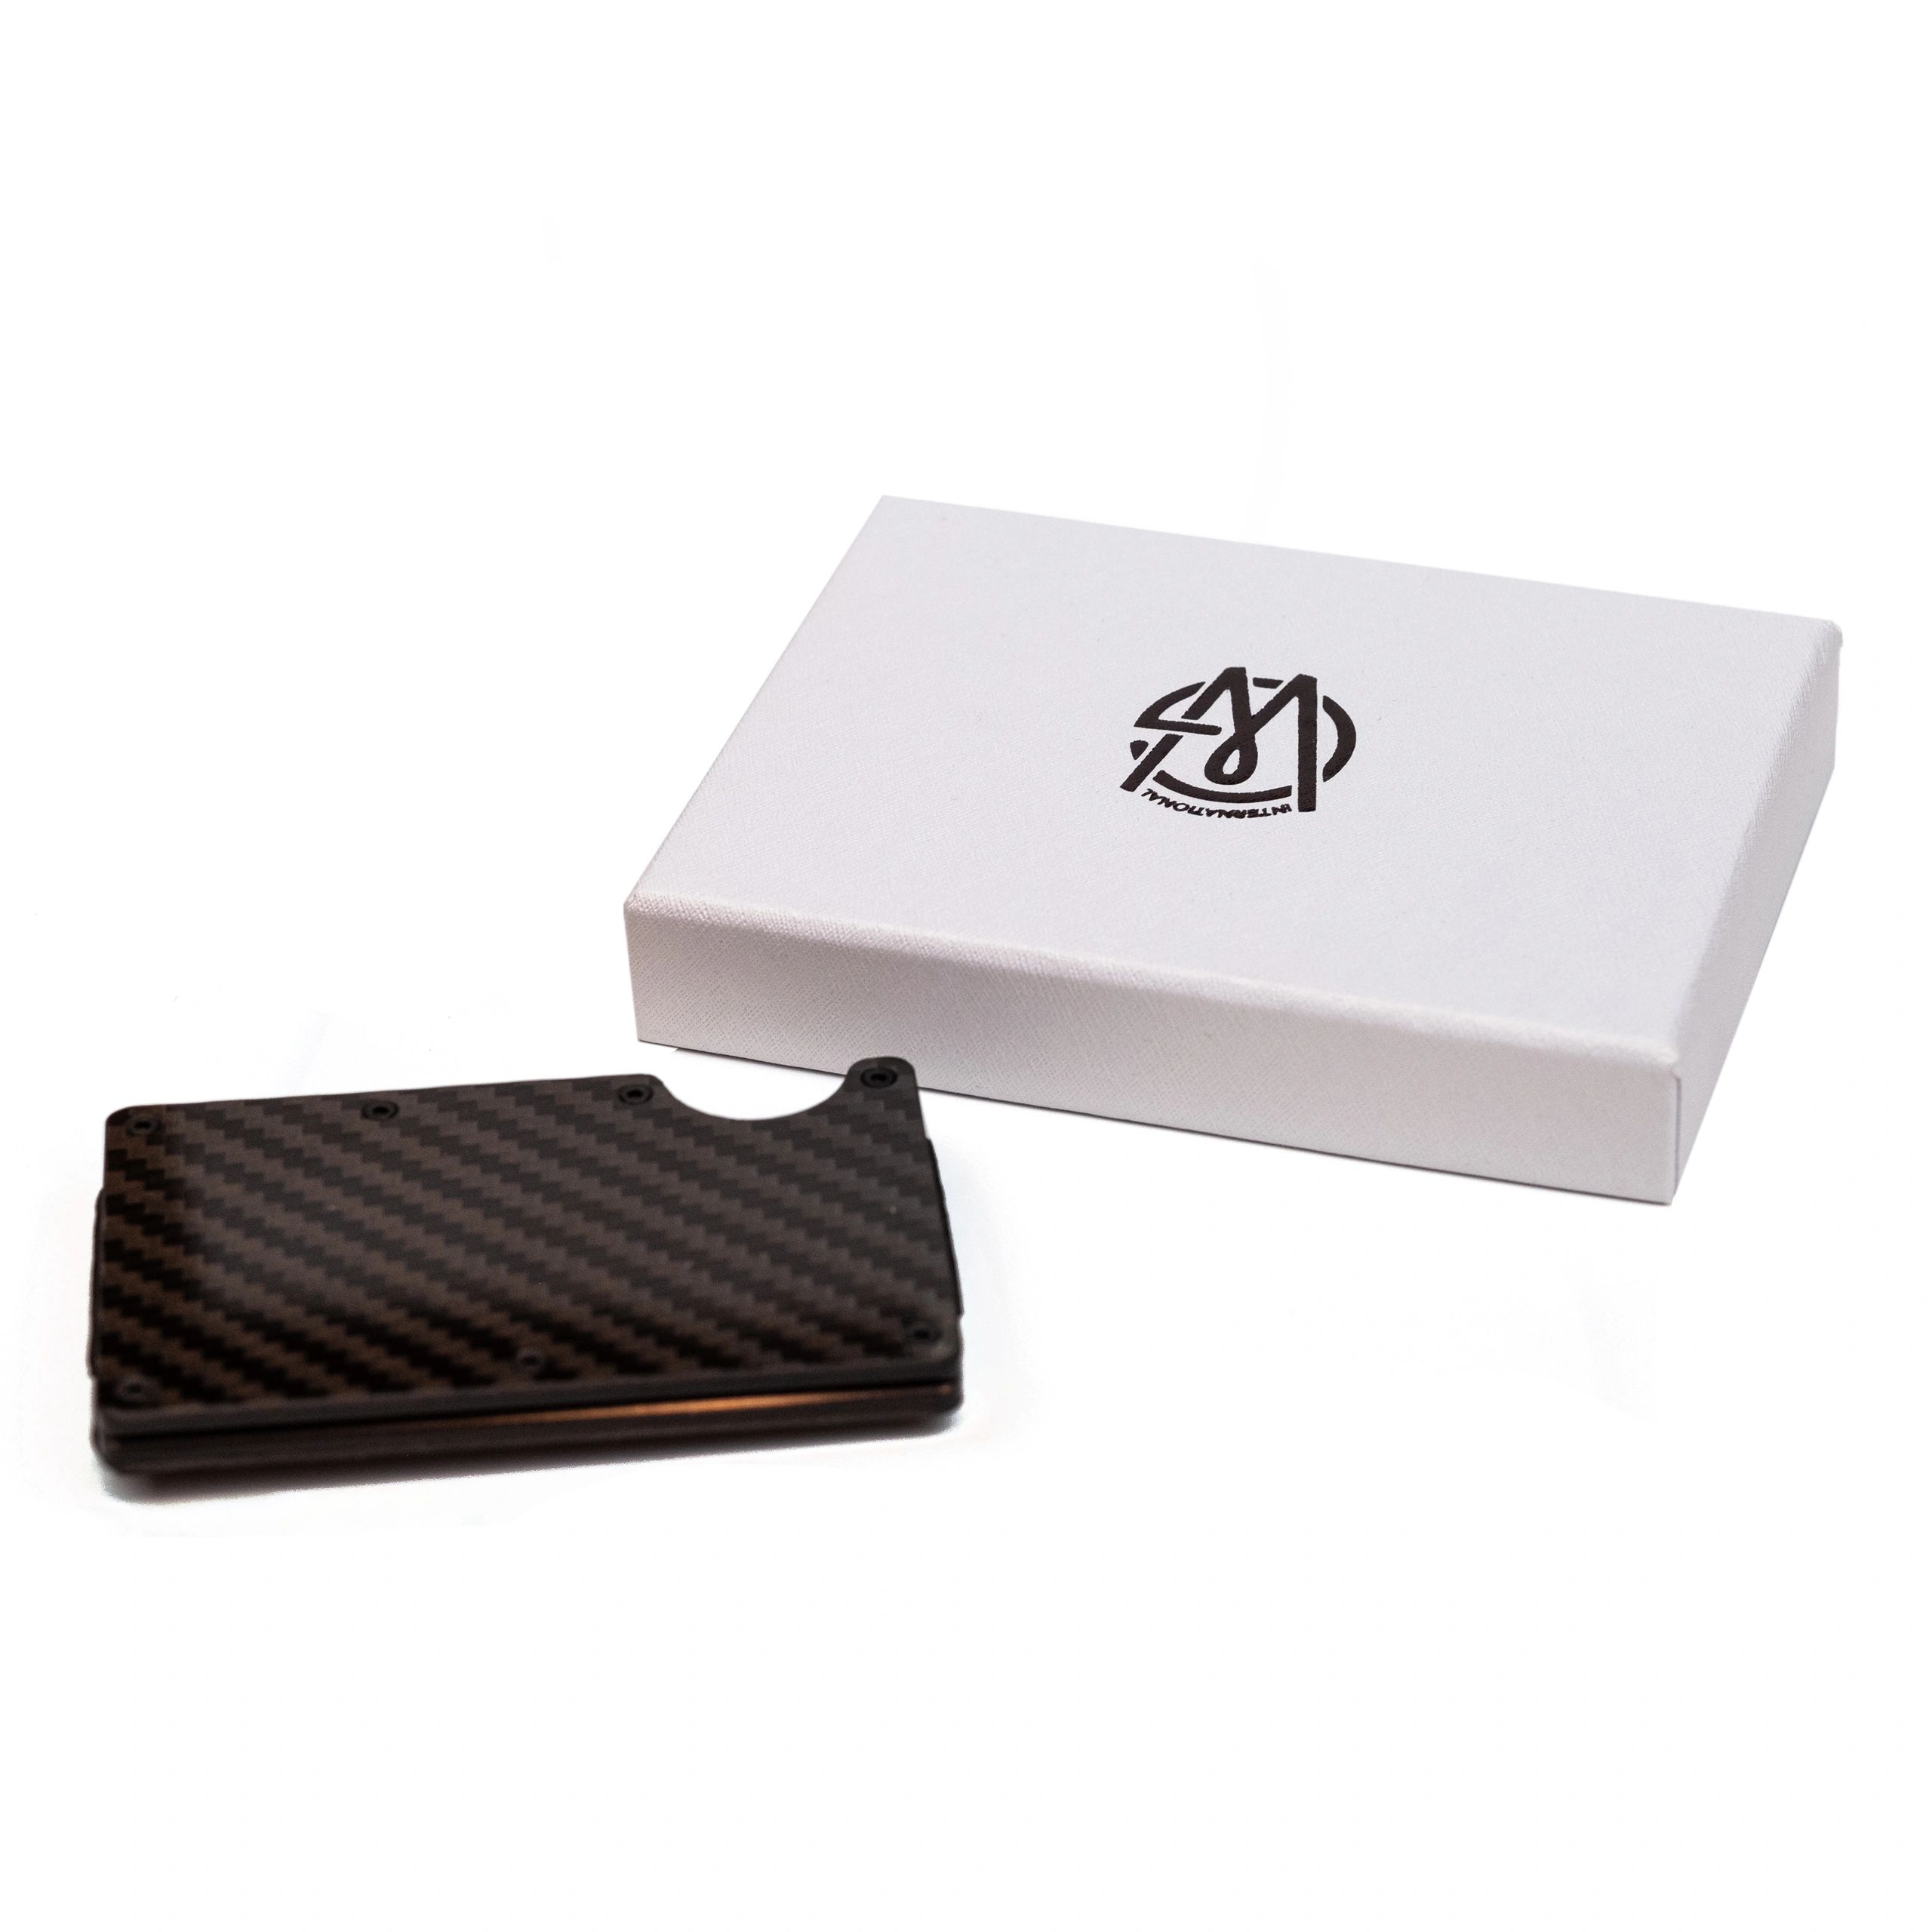 Carbon Fiber Wallet With RFID Protection